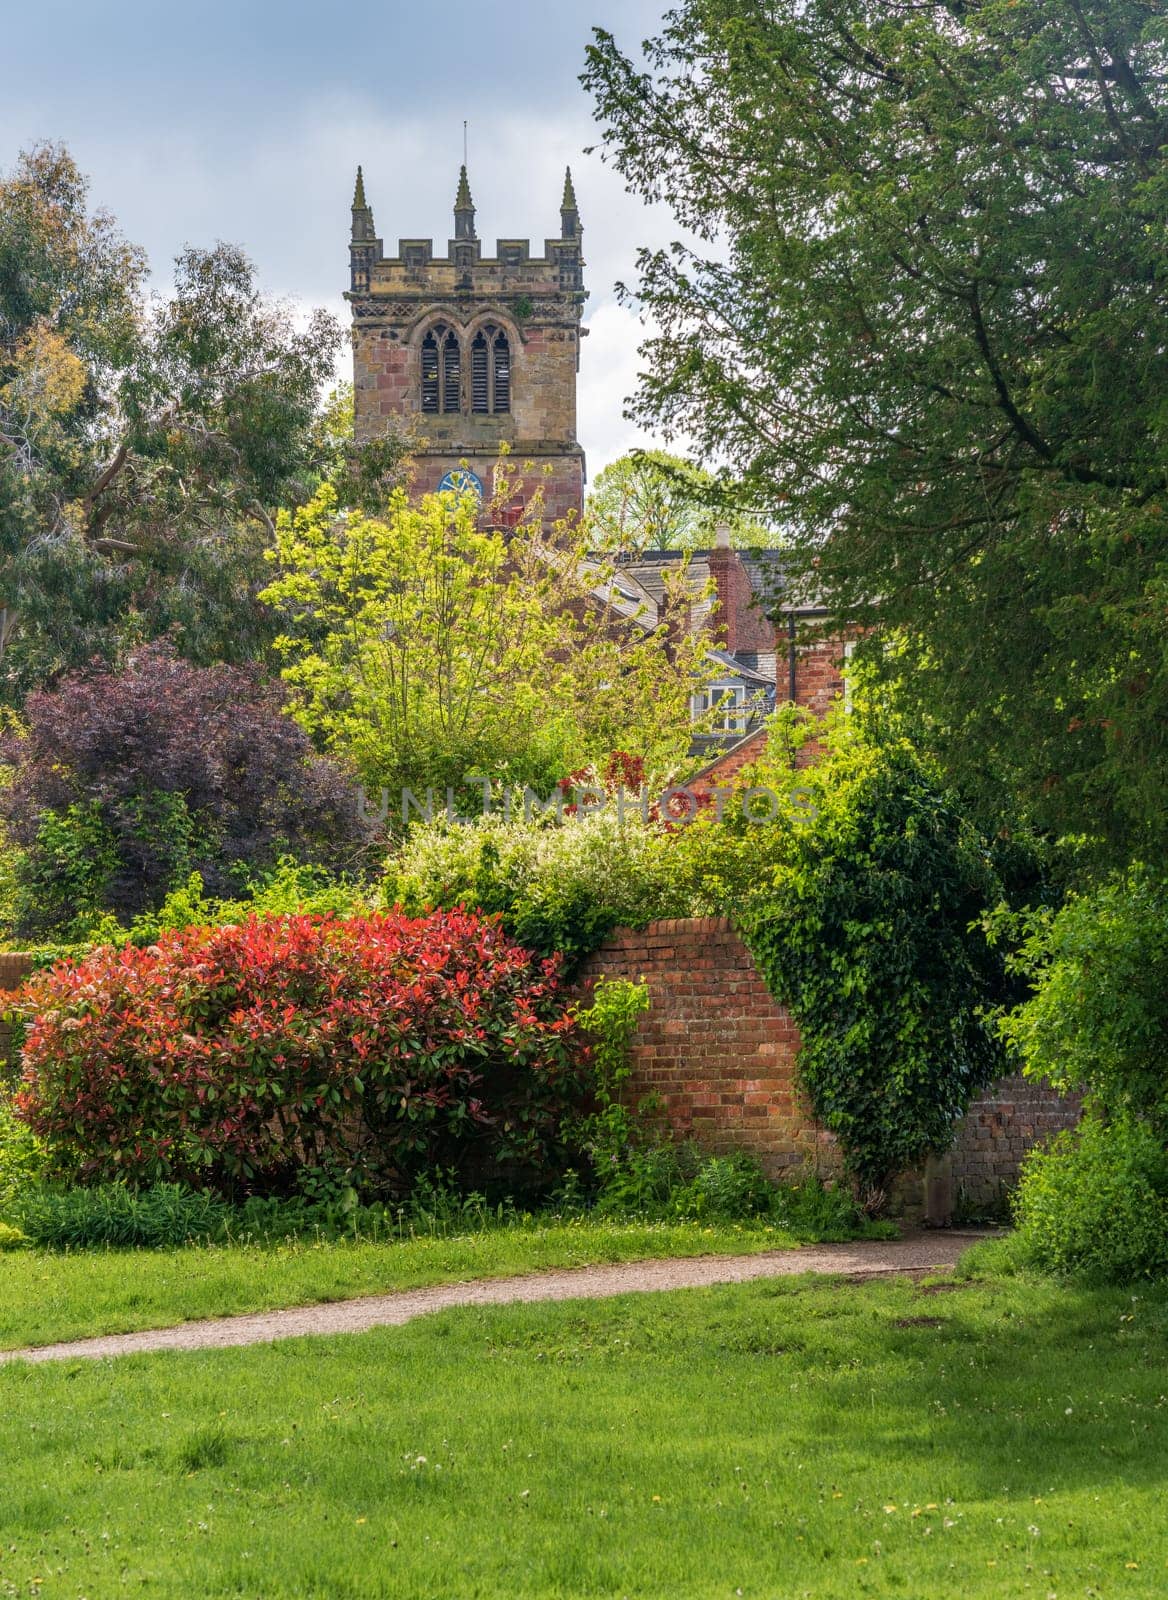 Church tower of parish church of St Mary in Ellesmere Shropshire from gardens